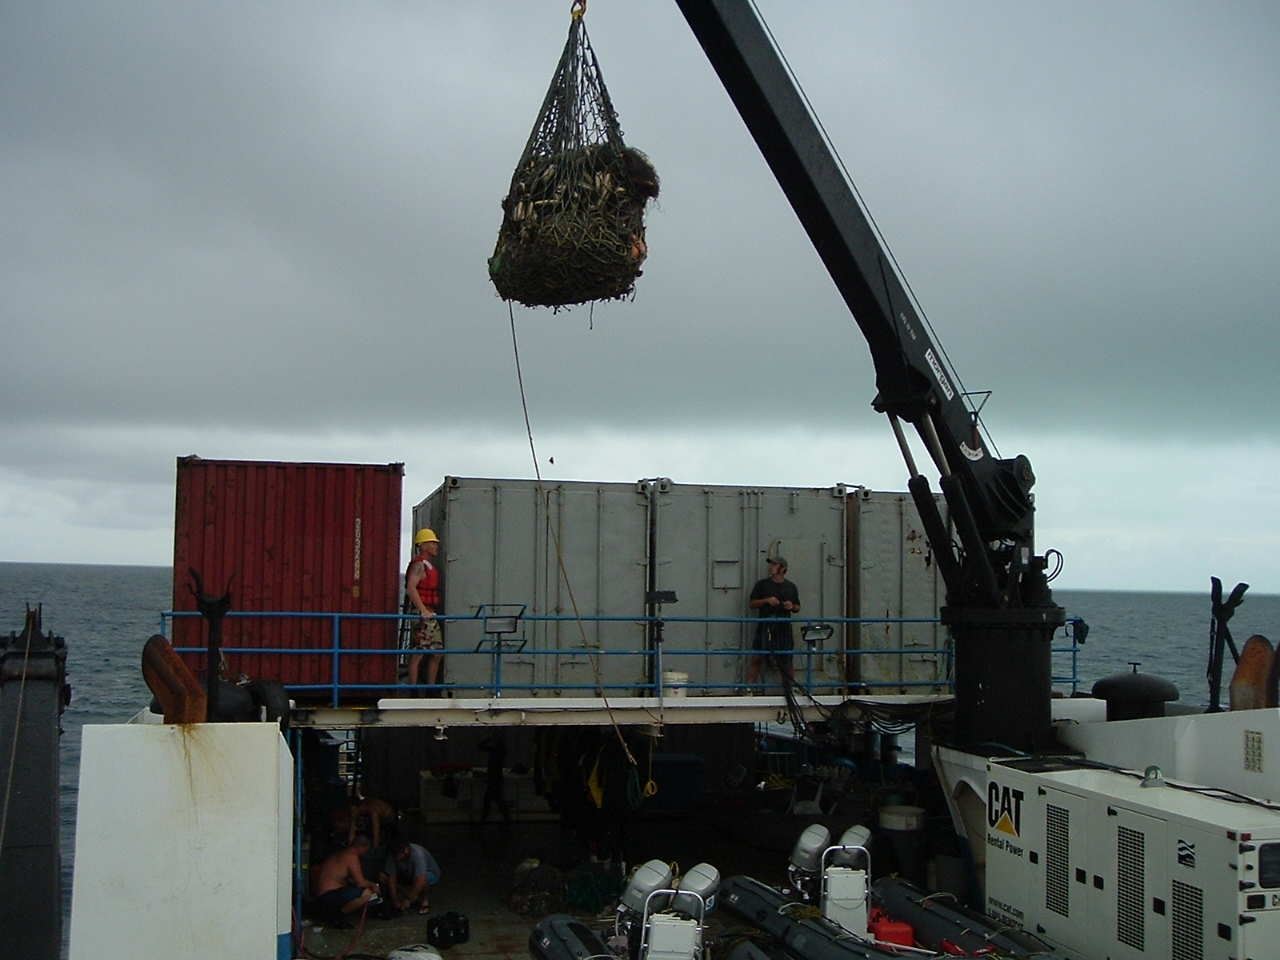 Putting debris in shipping containers for final disposition